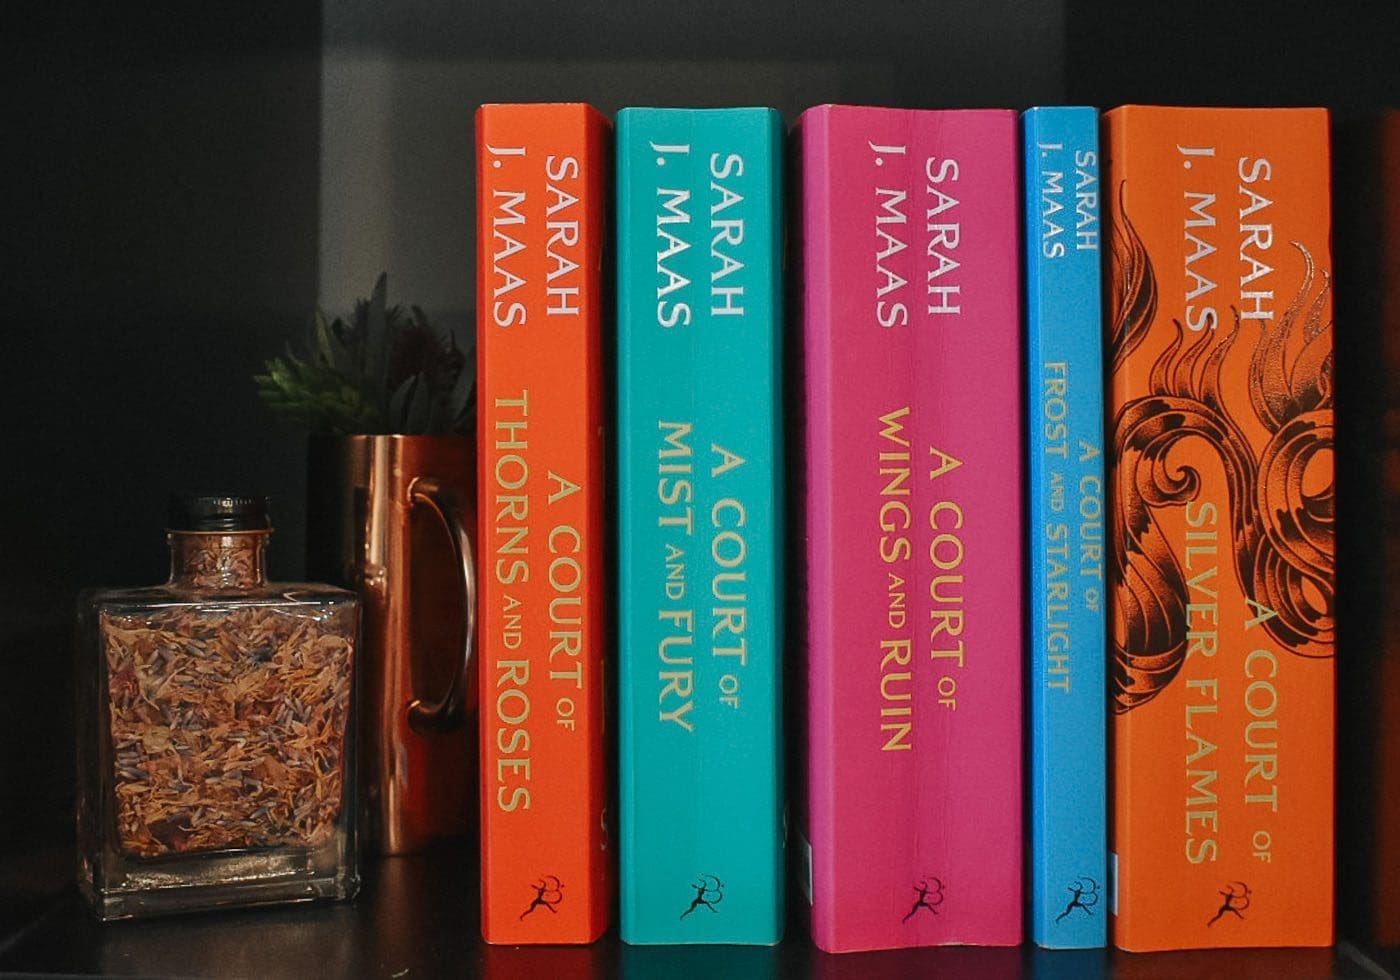 A Court of Thorns and Roses book series by Sarah J. Maas CP